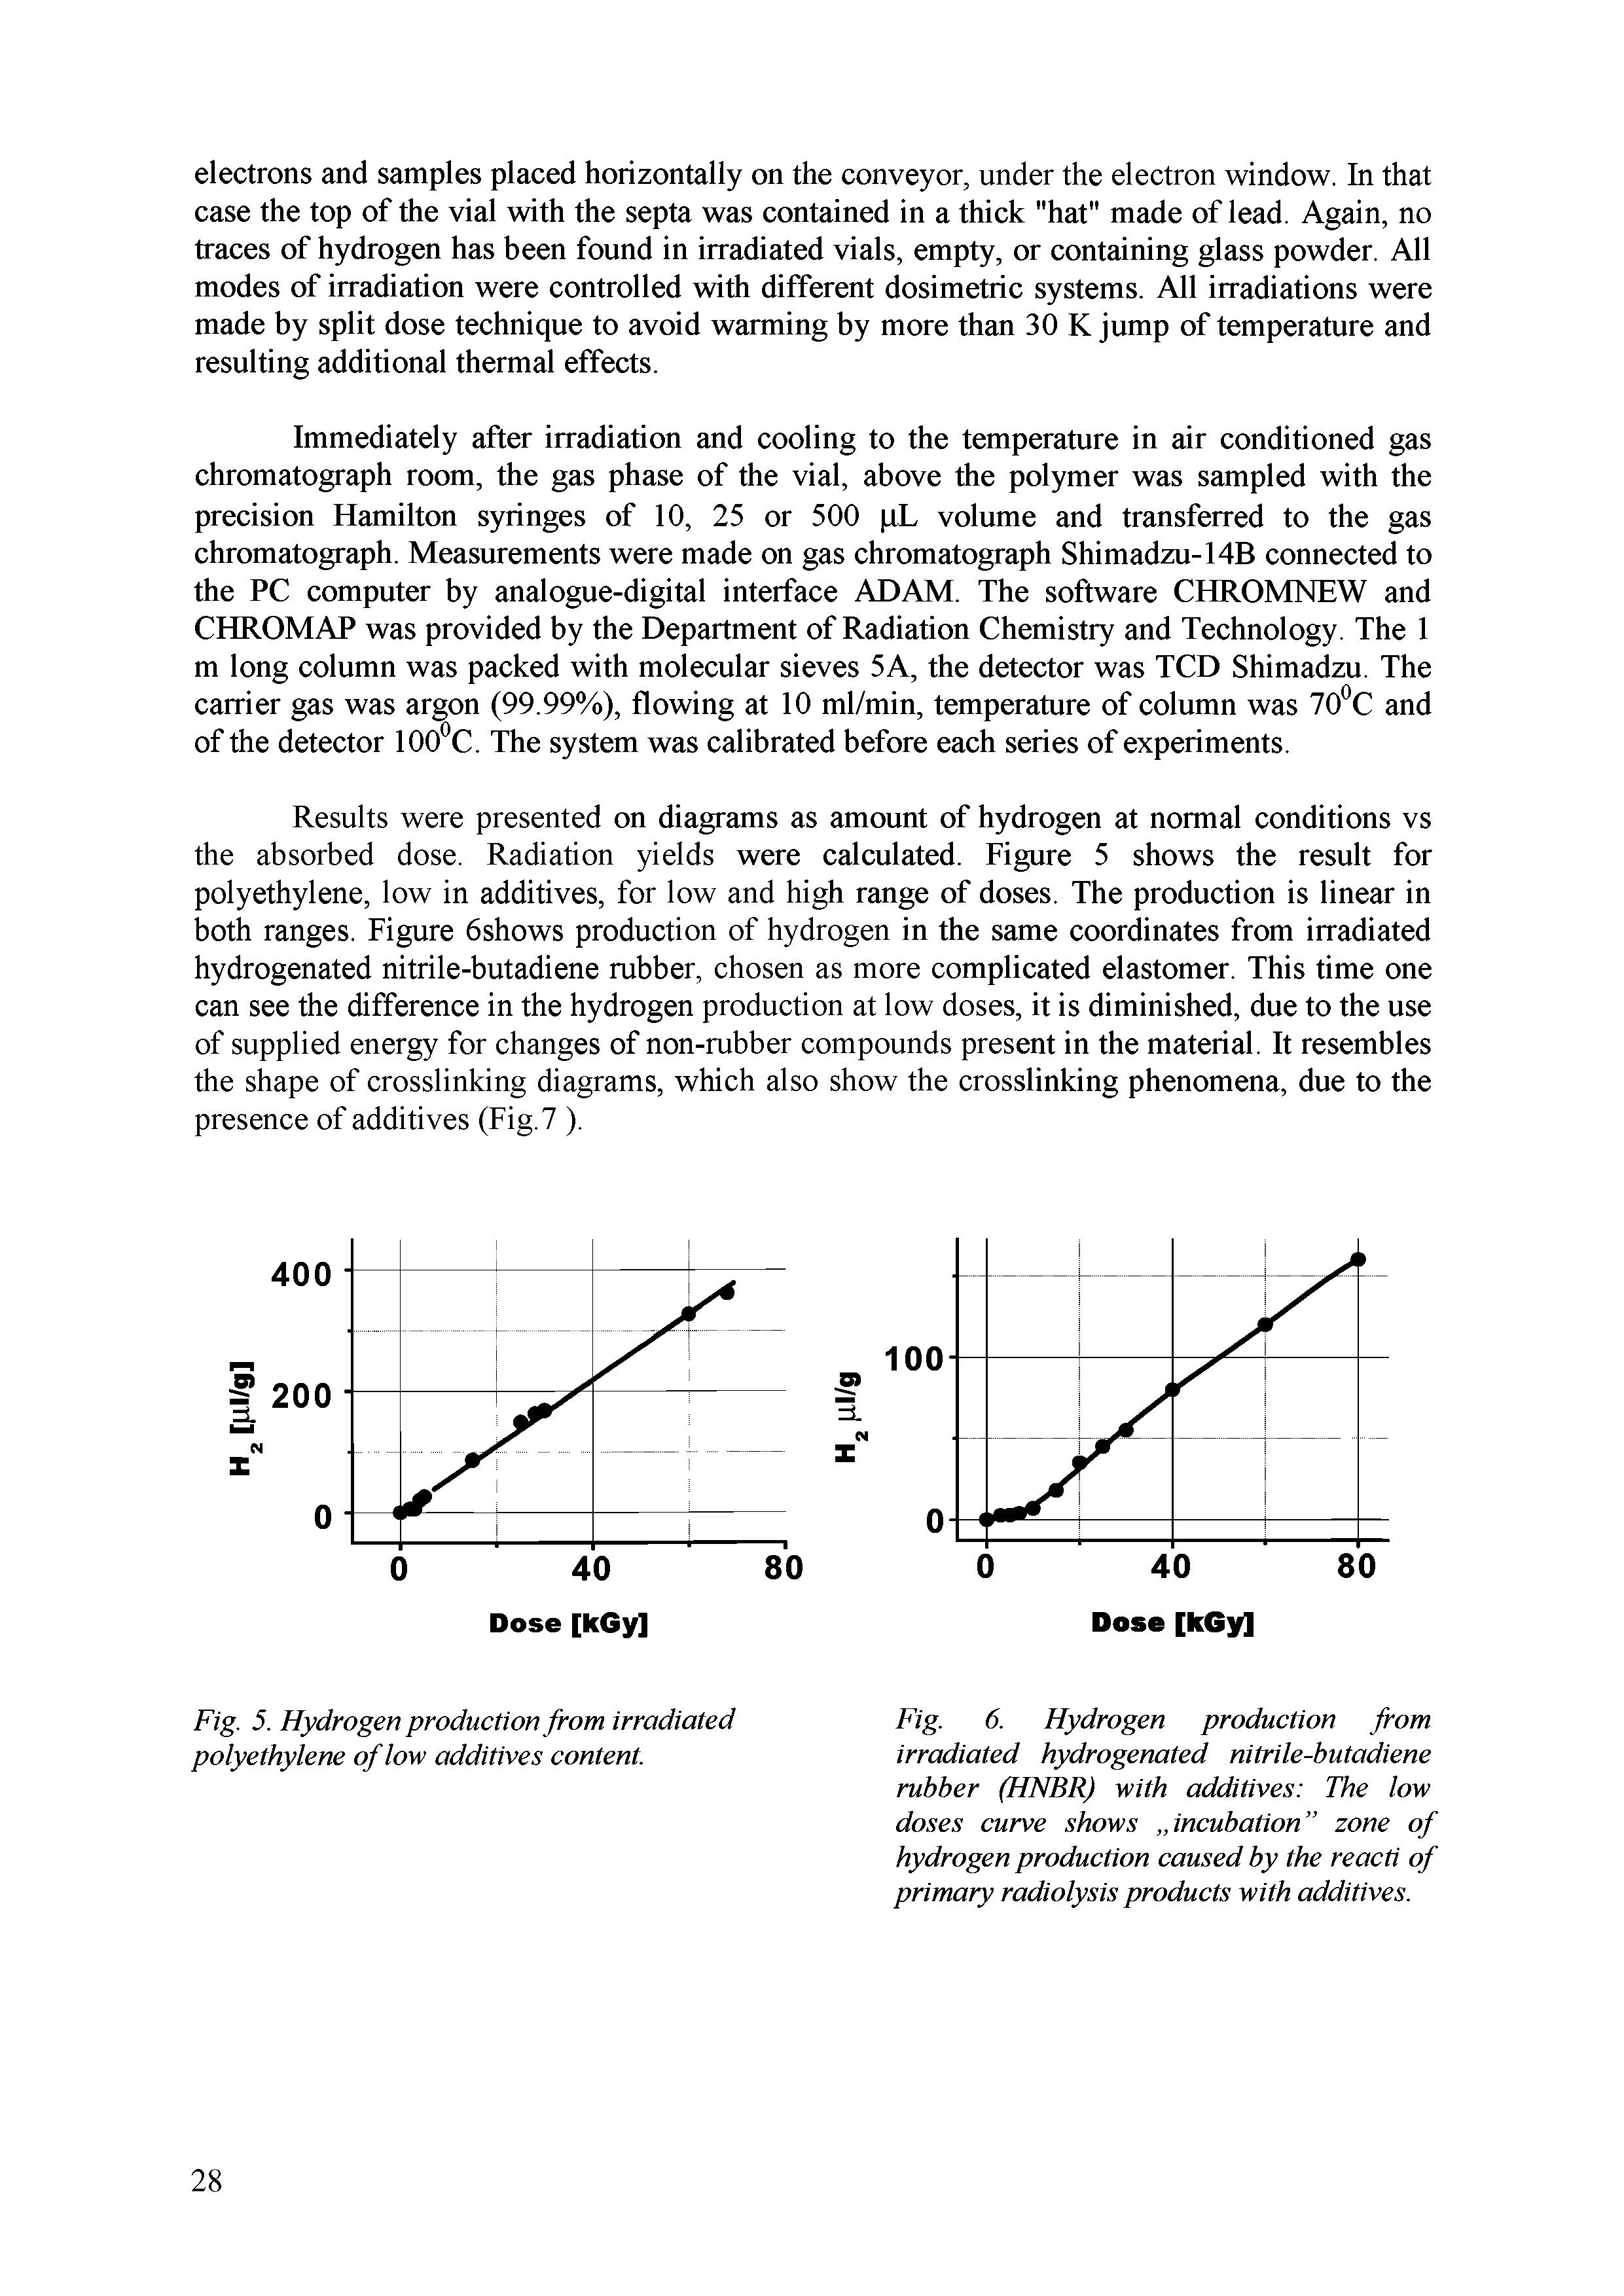 Fig. 5. Hydrogen production from irradiated polyethylene of low additives content.